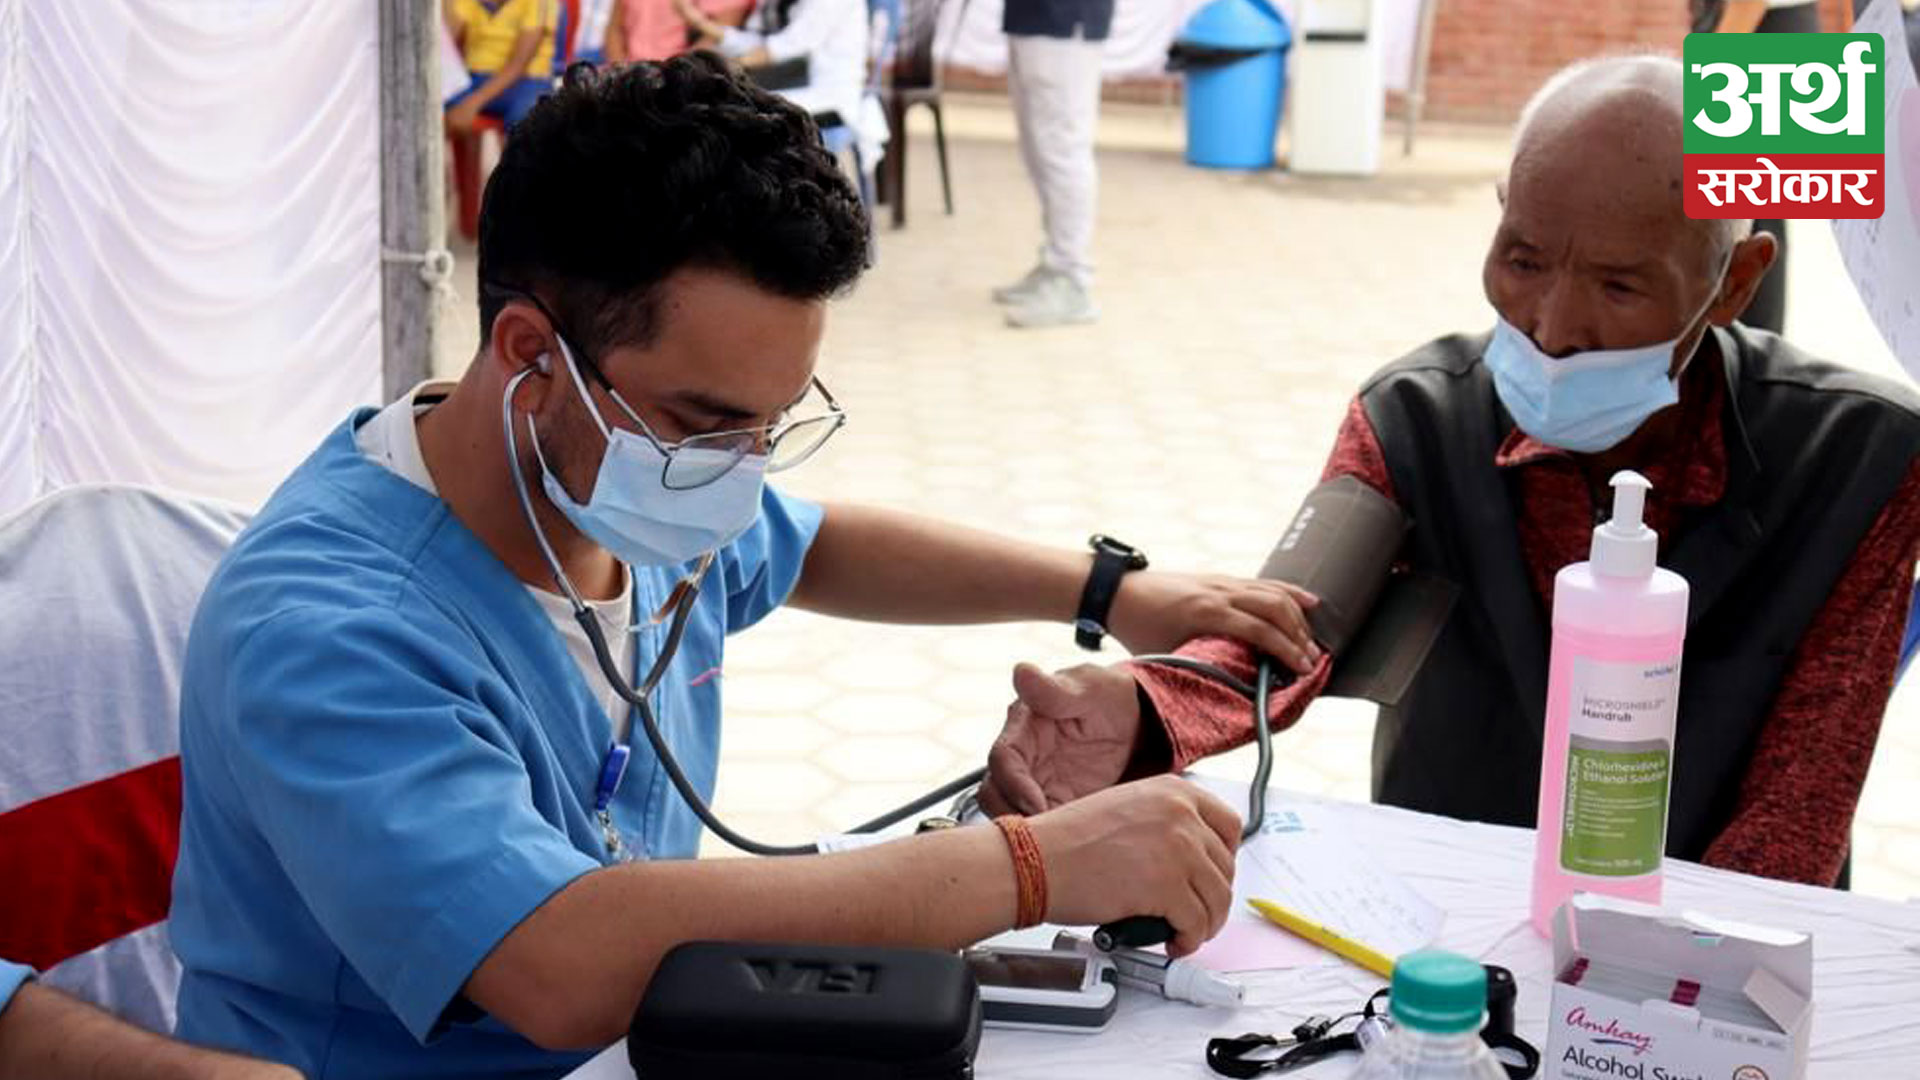 Ncell organises free health camp, marking 18th anniversary and World Heart Day